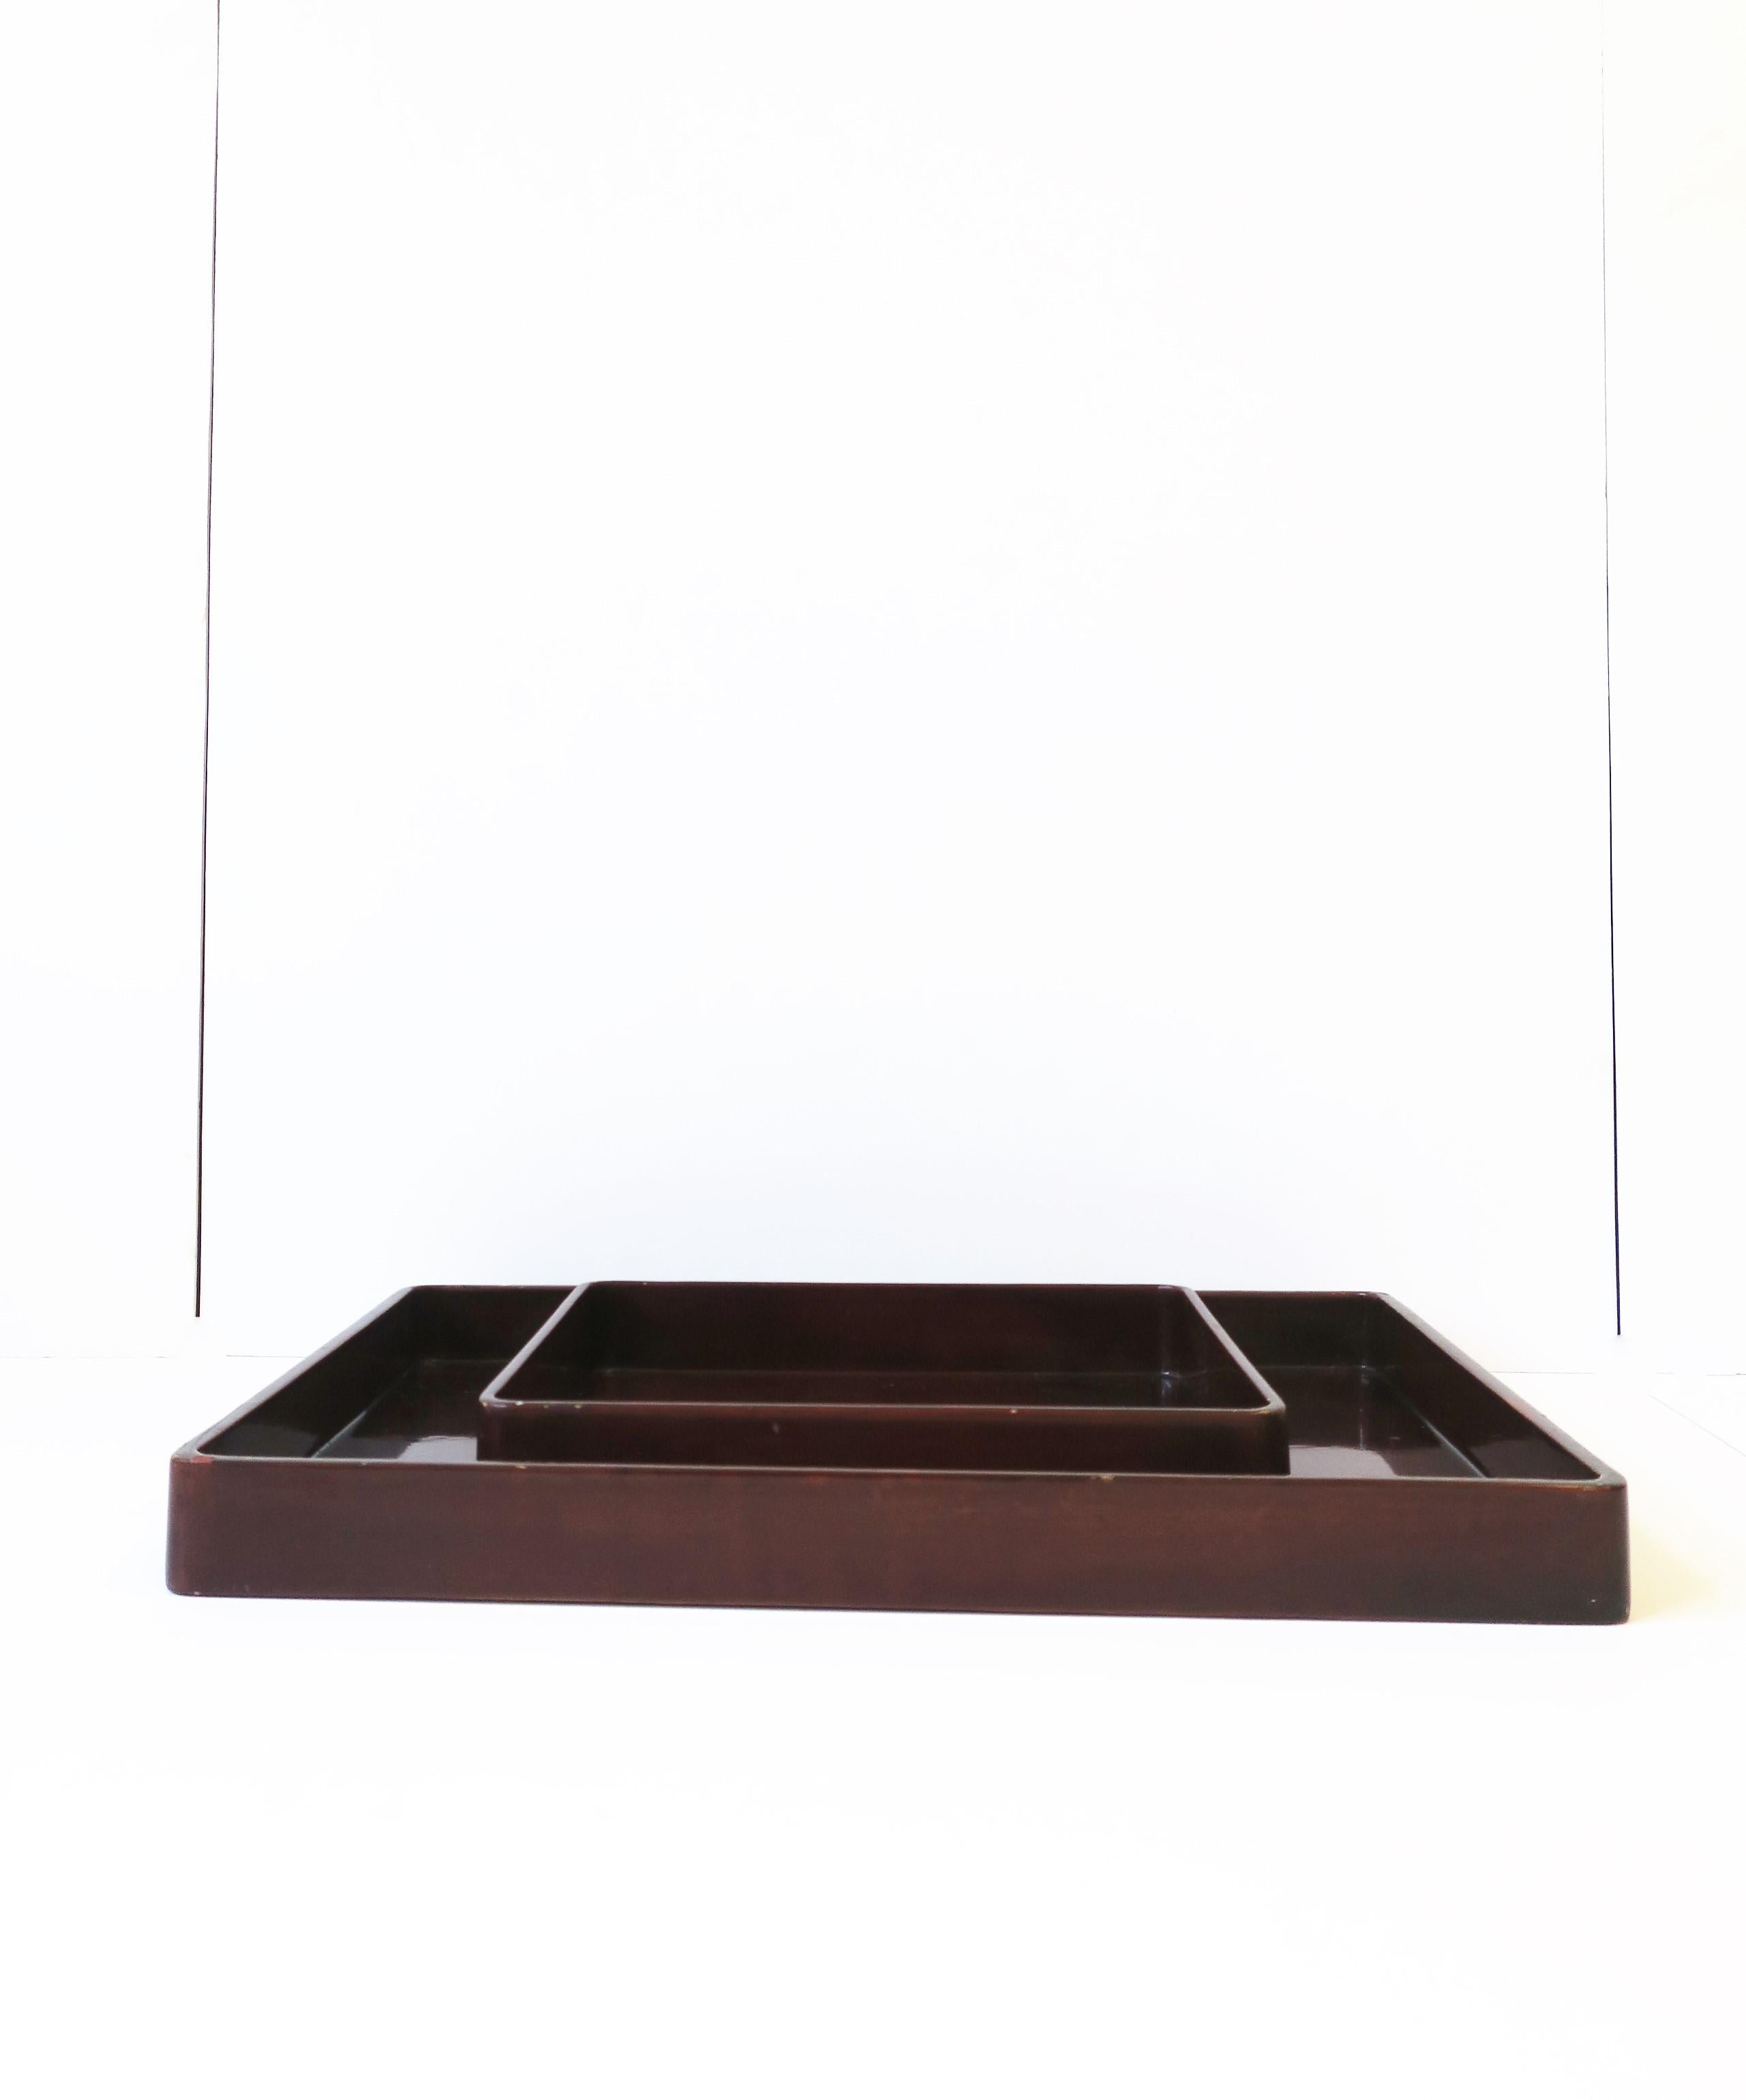 Red Burgundy Lacquer Serving Tray by Designer Rae Kasian, Large 5